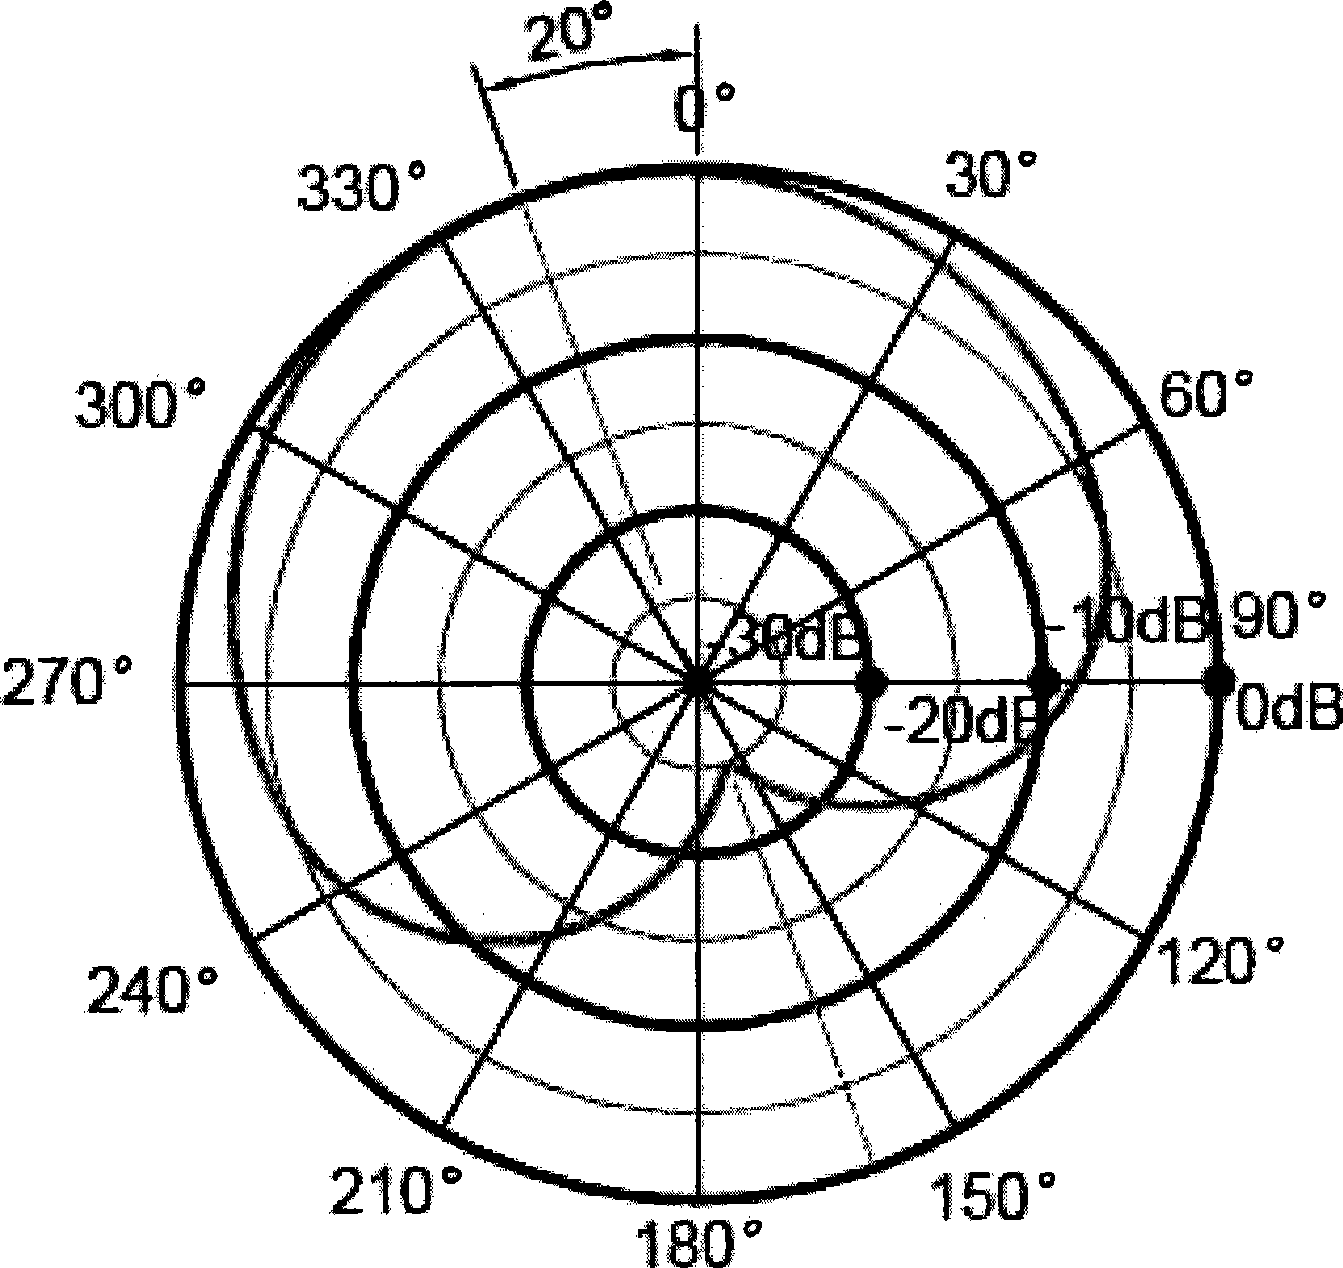 Mobile phone construction and method for enhancing voice call quality of mobile phone